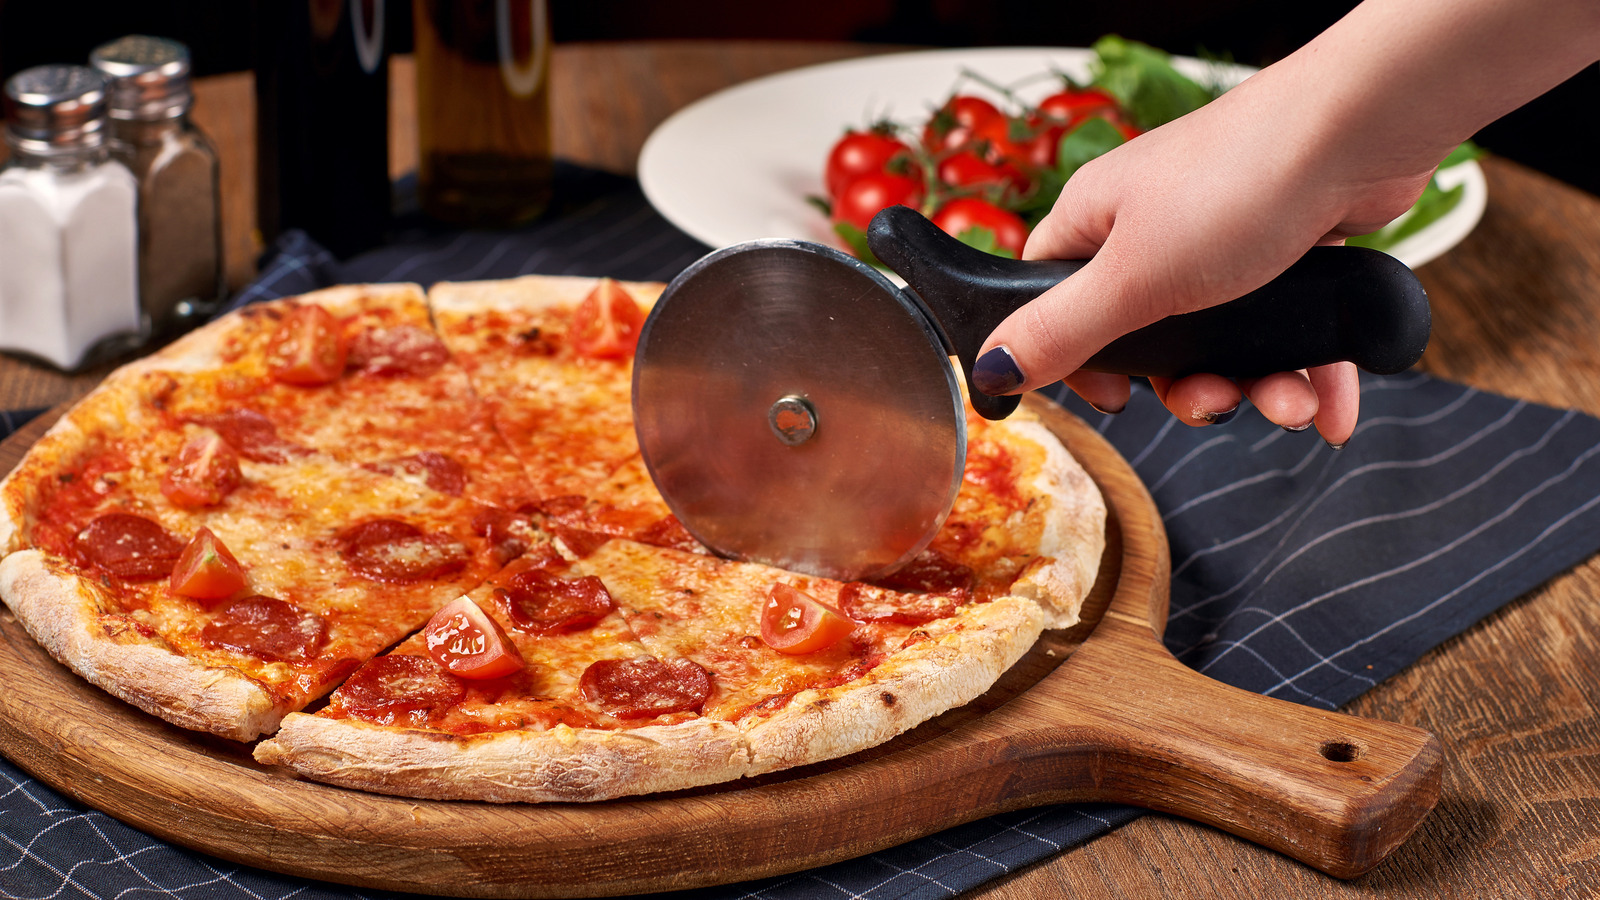 https://www.tastingtable.com/img/gallery/replace-your-pizza-cutter-with-this-handy-office-tool/l-intro-1665679423.jpg